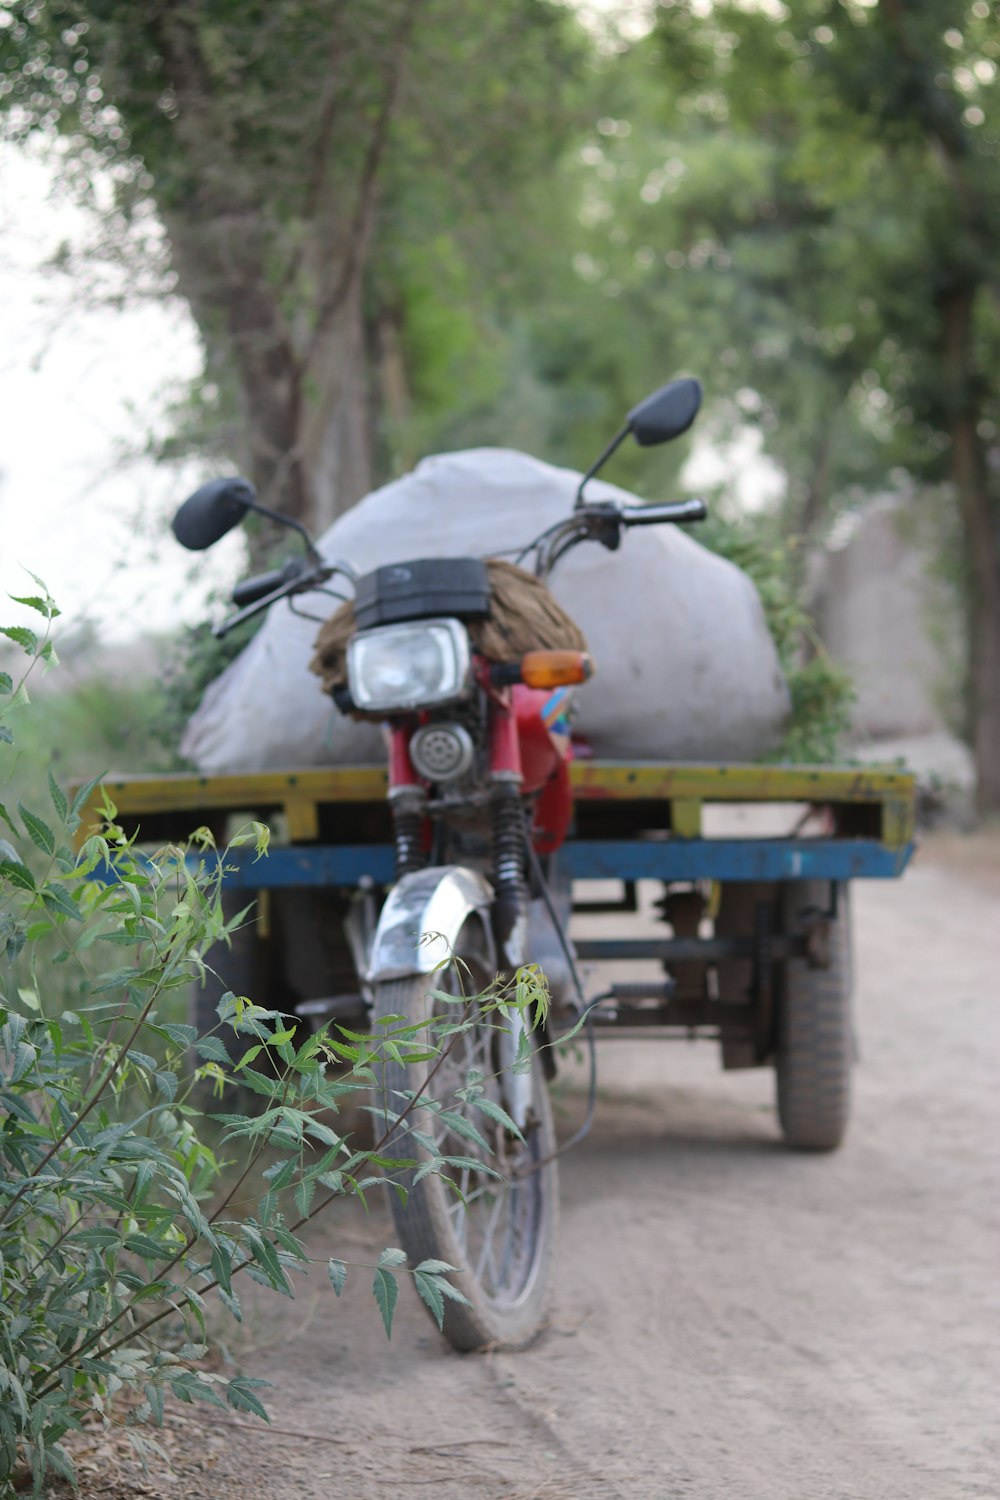 a motorcycle with a trailer attached to it on a dirt road